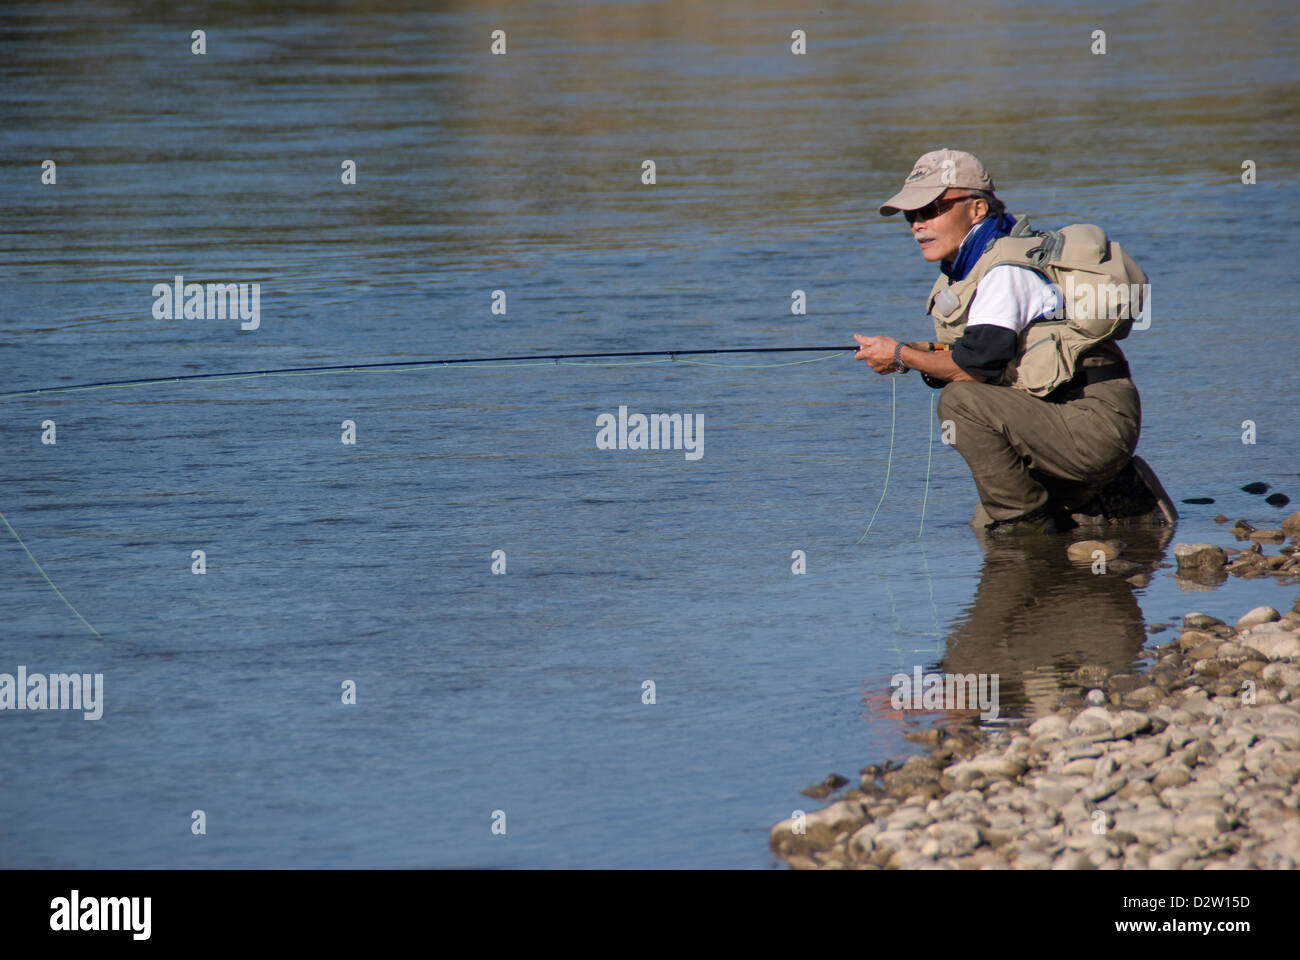 A Fly fisherman sight casting to Brown trout in a tailwater section of the Red Deer, River, Alberta,Canada. Stock Photo